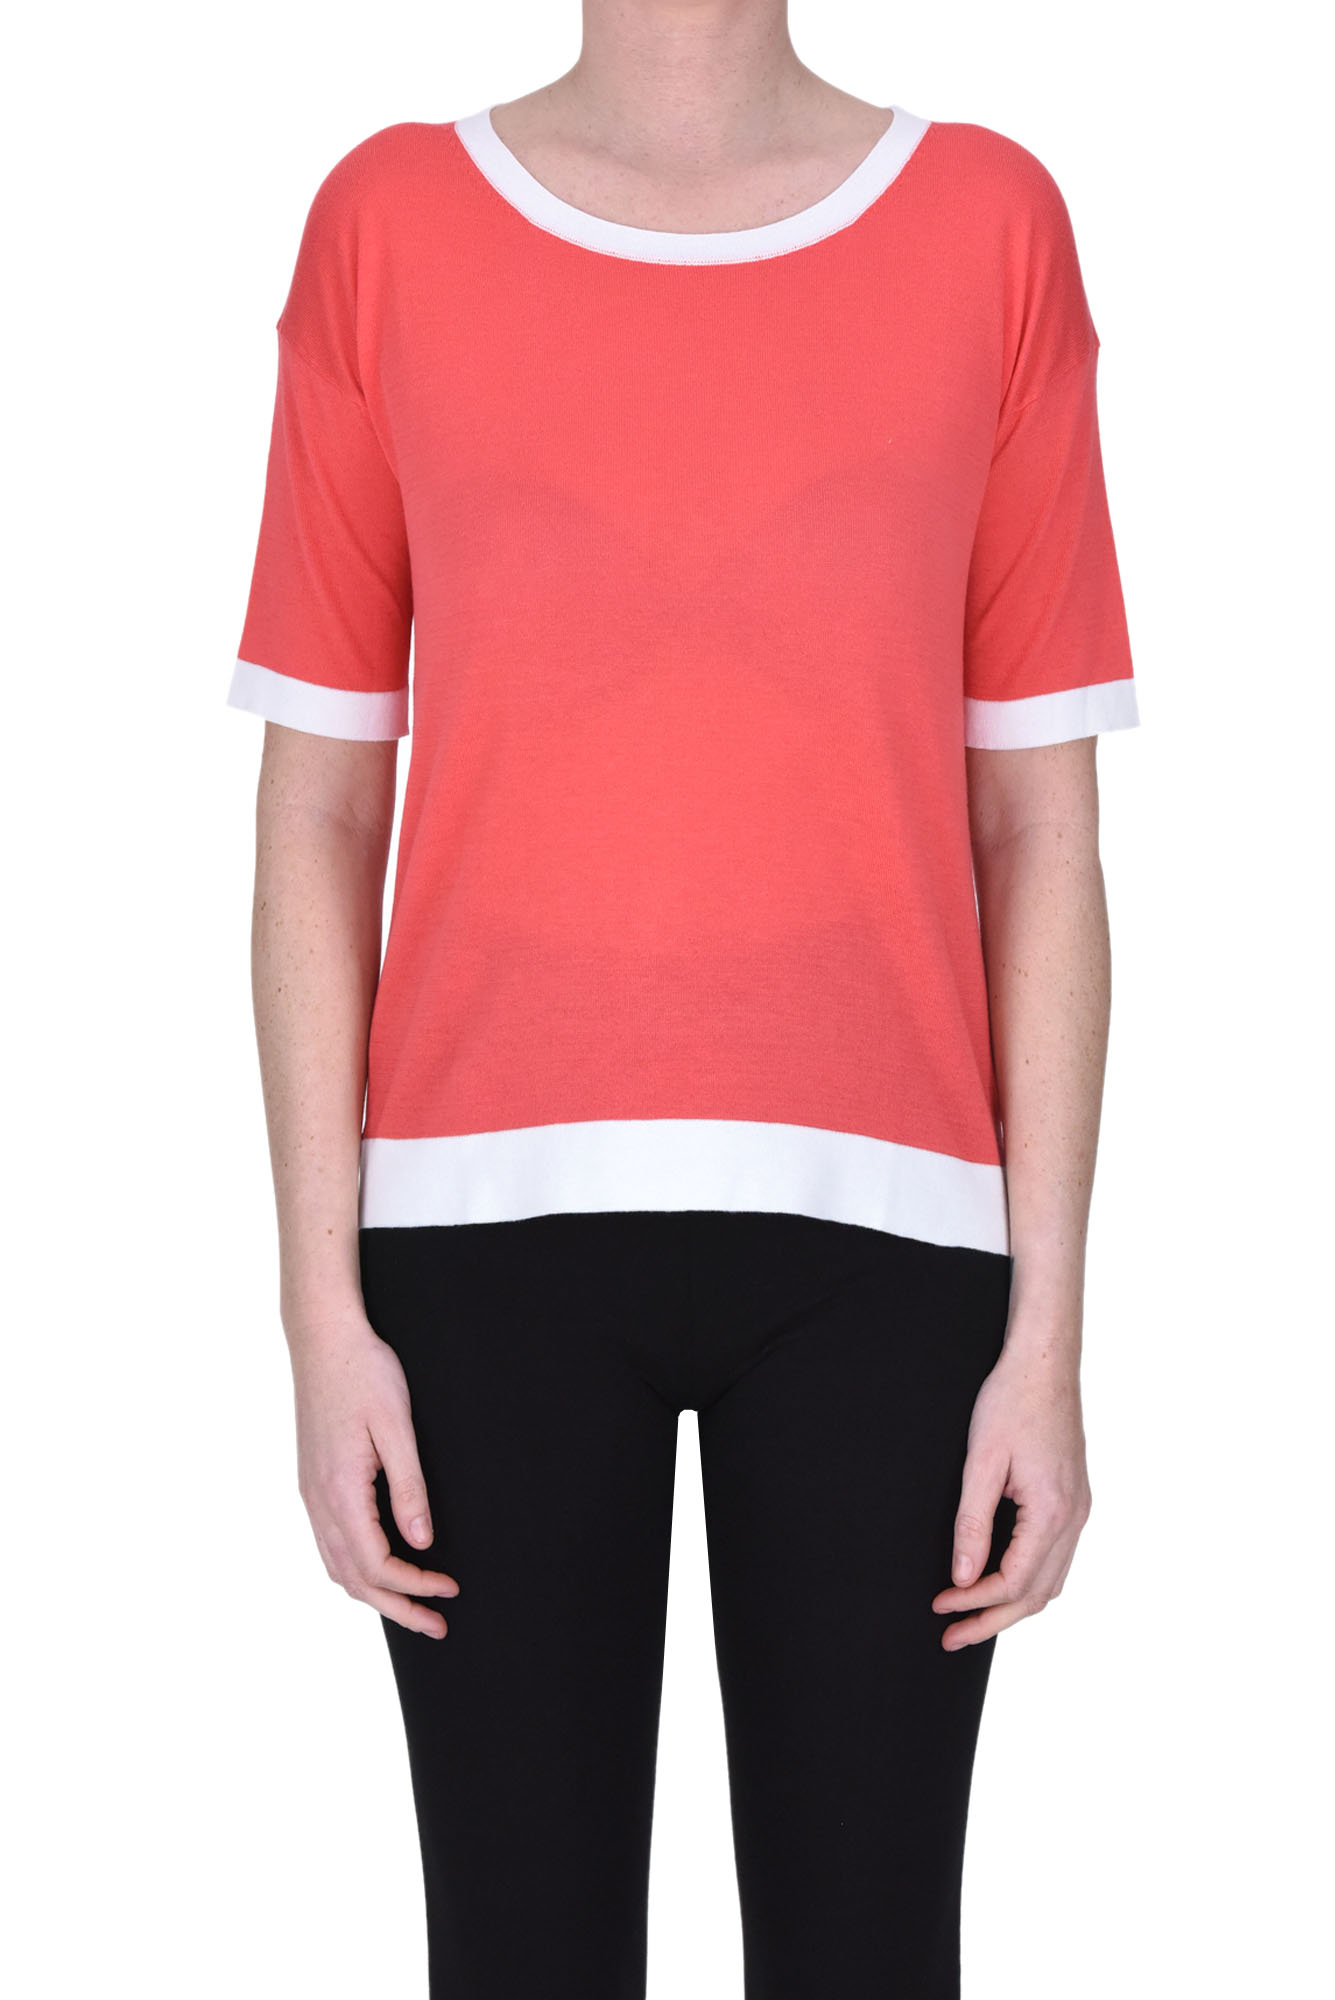 Anneclaire Contrasting Trims Pullover In Coral